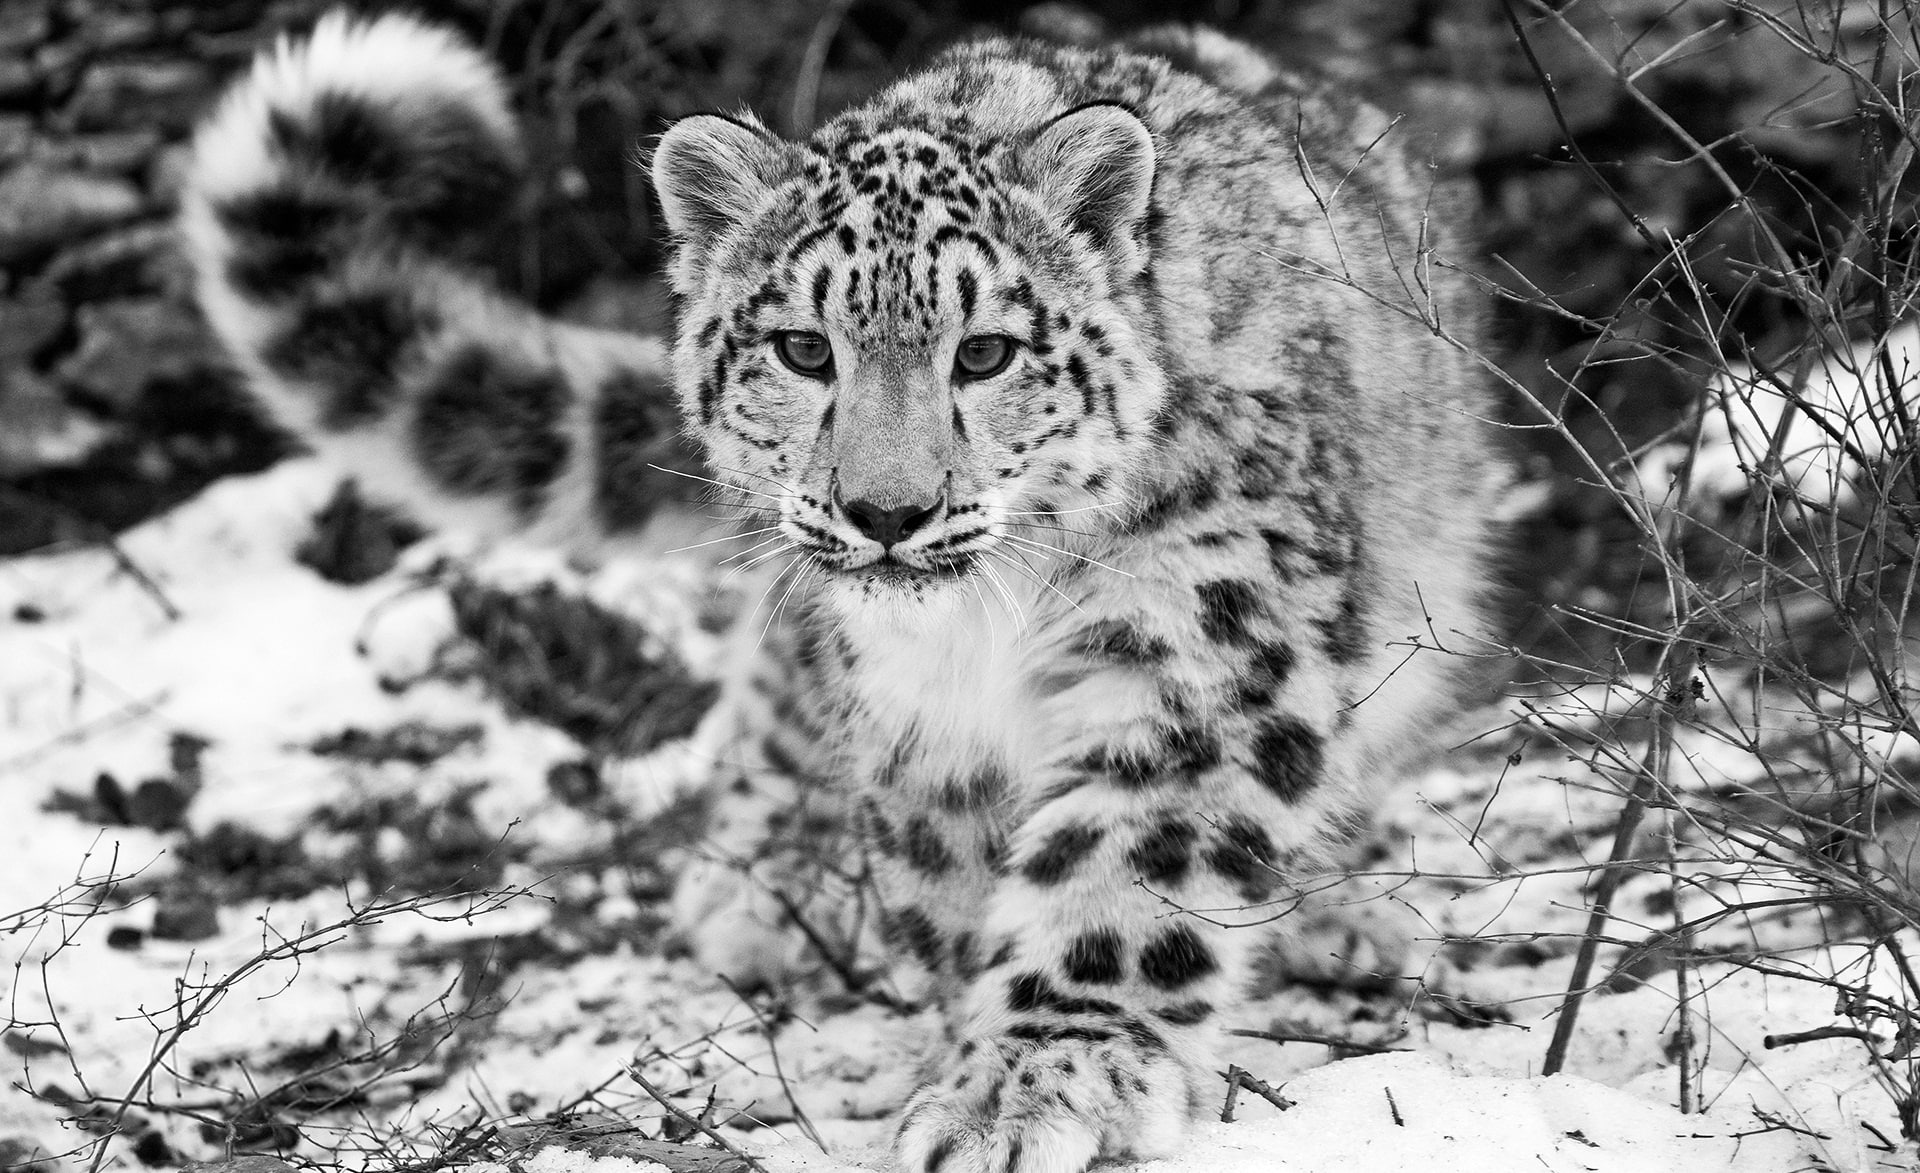 Snow Leopard HD Wallpaper, grayscale tiger, Animals, Wild, animal themes